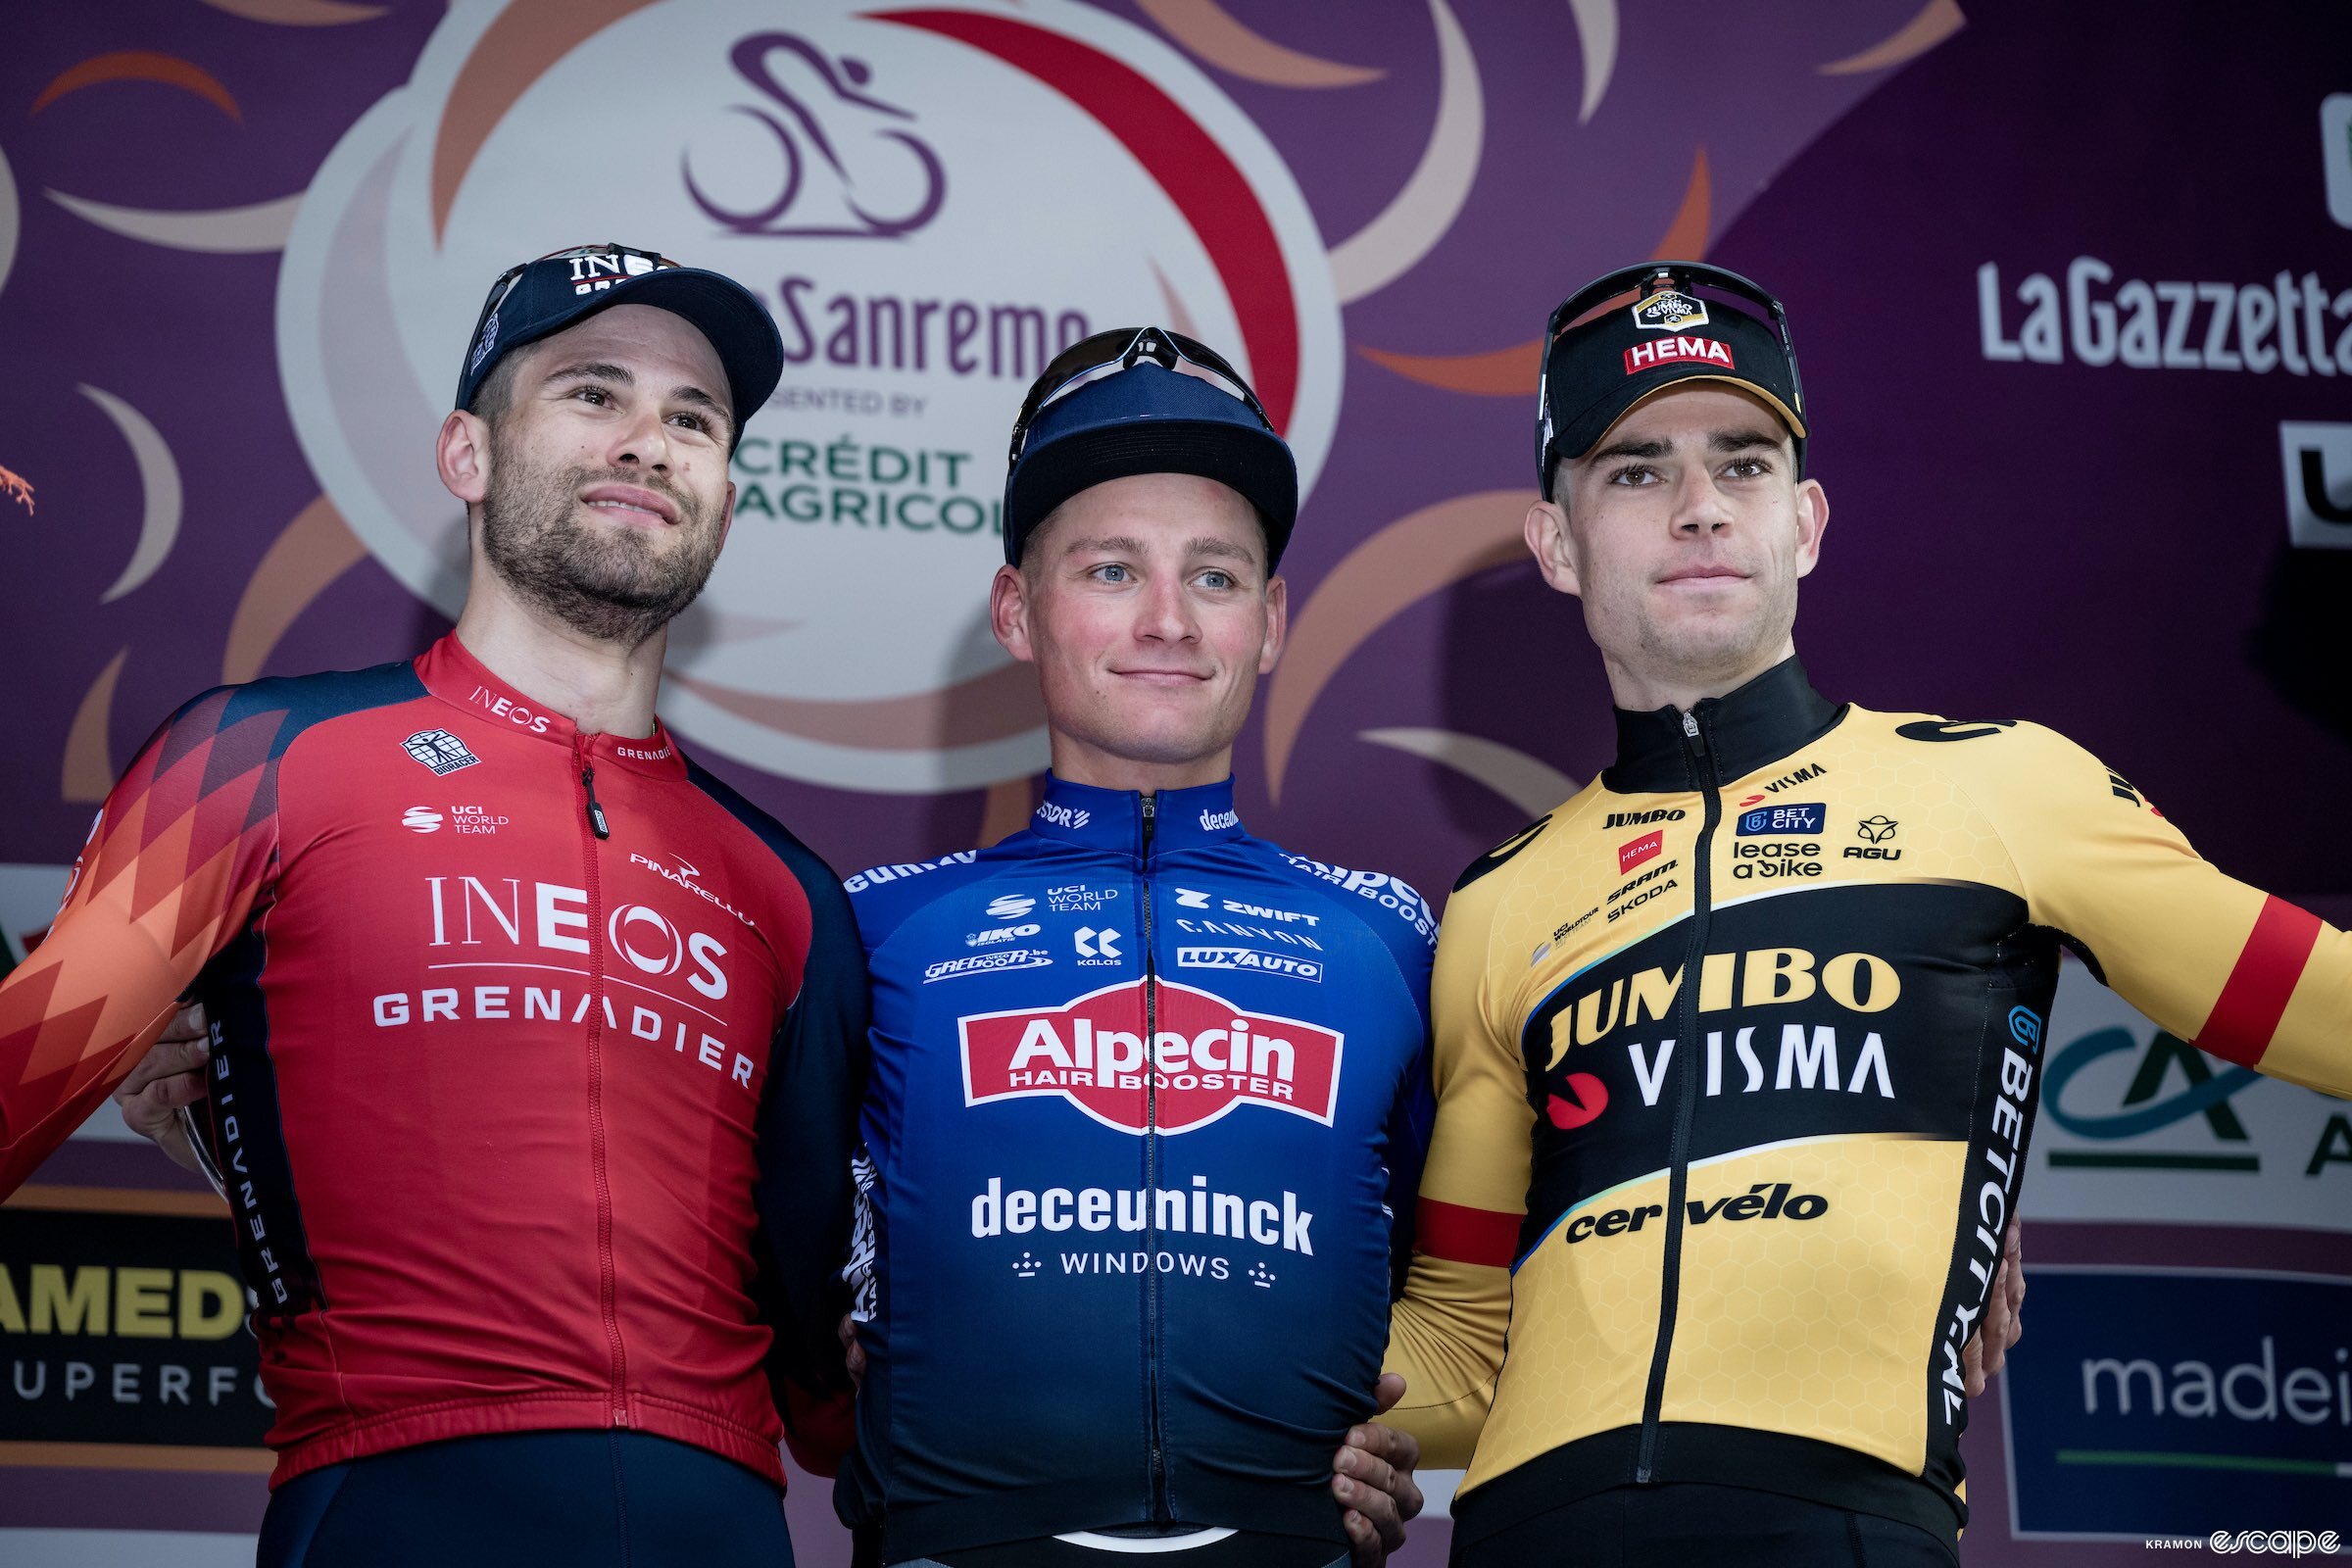 From left, Filippo Ganna, Mathieu van der Poel, and Wout van Aert stand on the podium of the 2023 Milan-San Remo. Van der Poel has a slight smile, while Ganna and Van Aert have more pensive expressions.